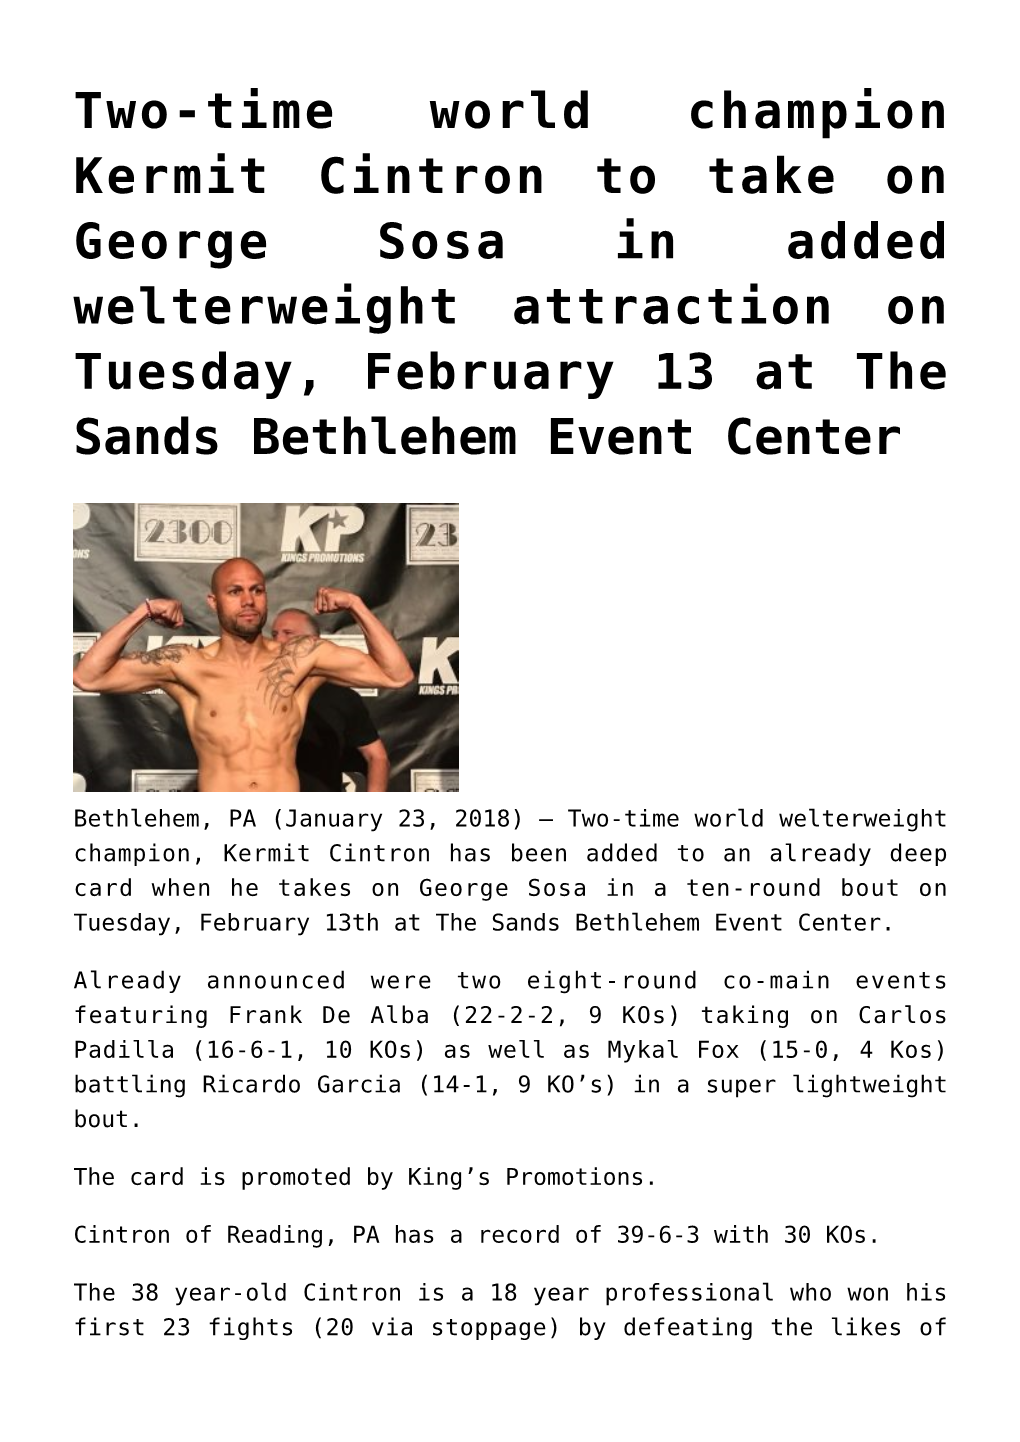 Two-Time World Champion Kermit Cintron to Take on George Sosa in Added Welterweight Attraction on Tuesday, February 13 at the Sands Bethlehem Event Center